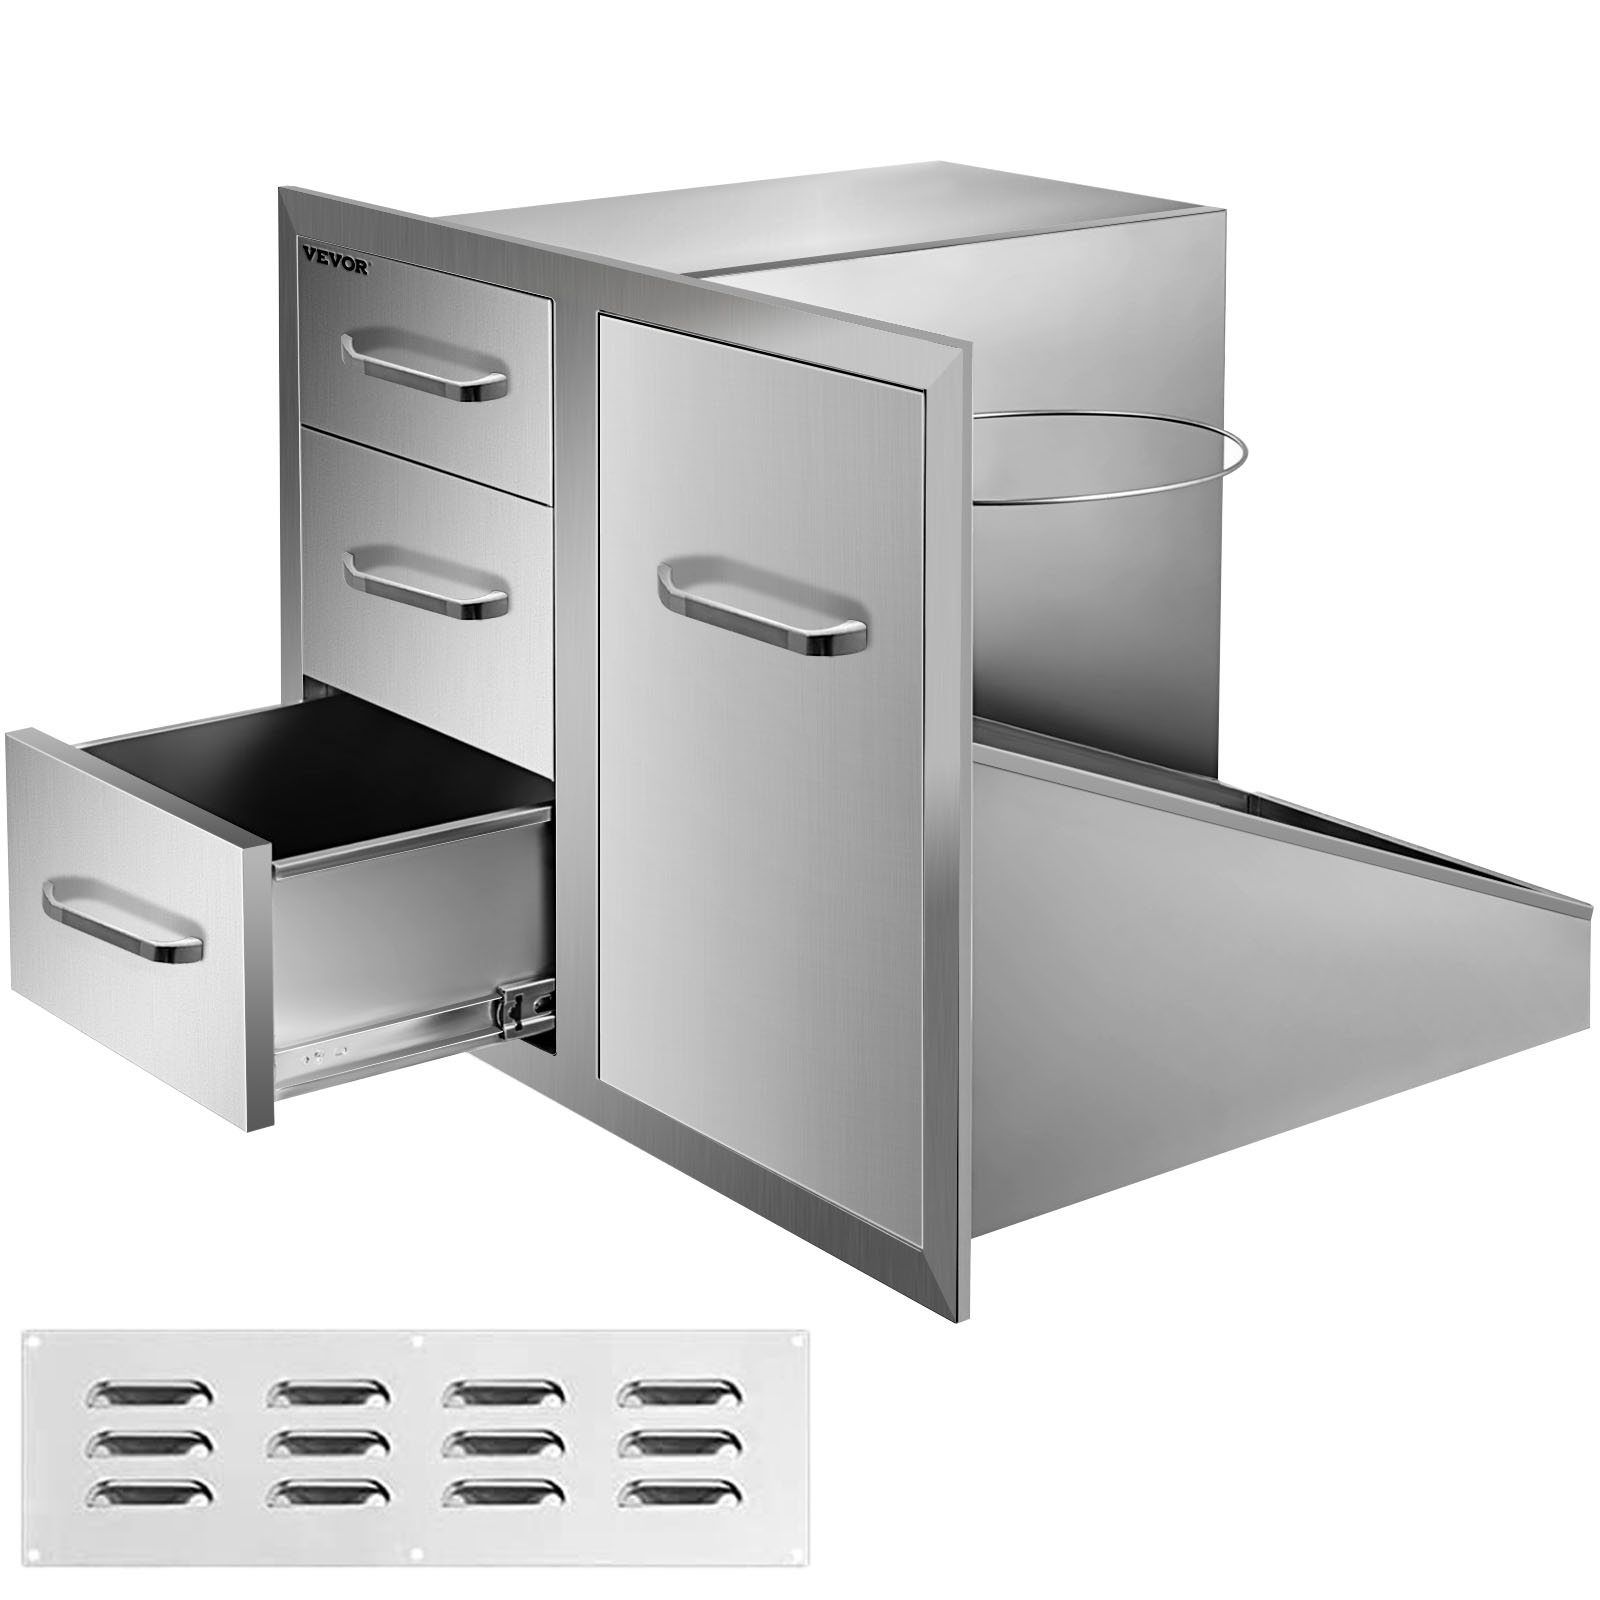 21.6"w X 29.5"h Outdoor Kitchen Bbq Island Door Drawer Combo Access Drawers от Vevor Many GEOs